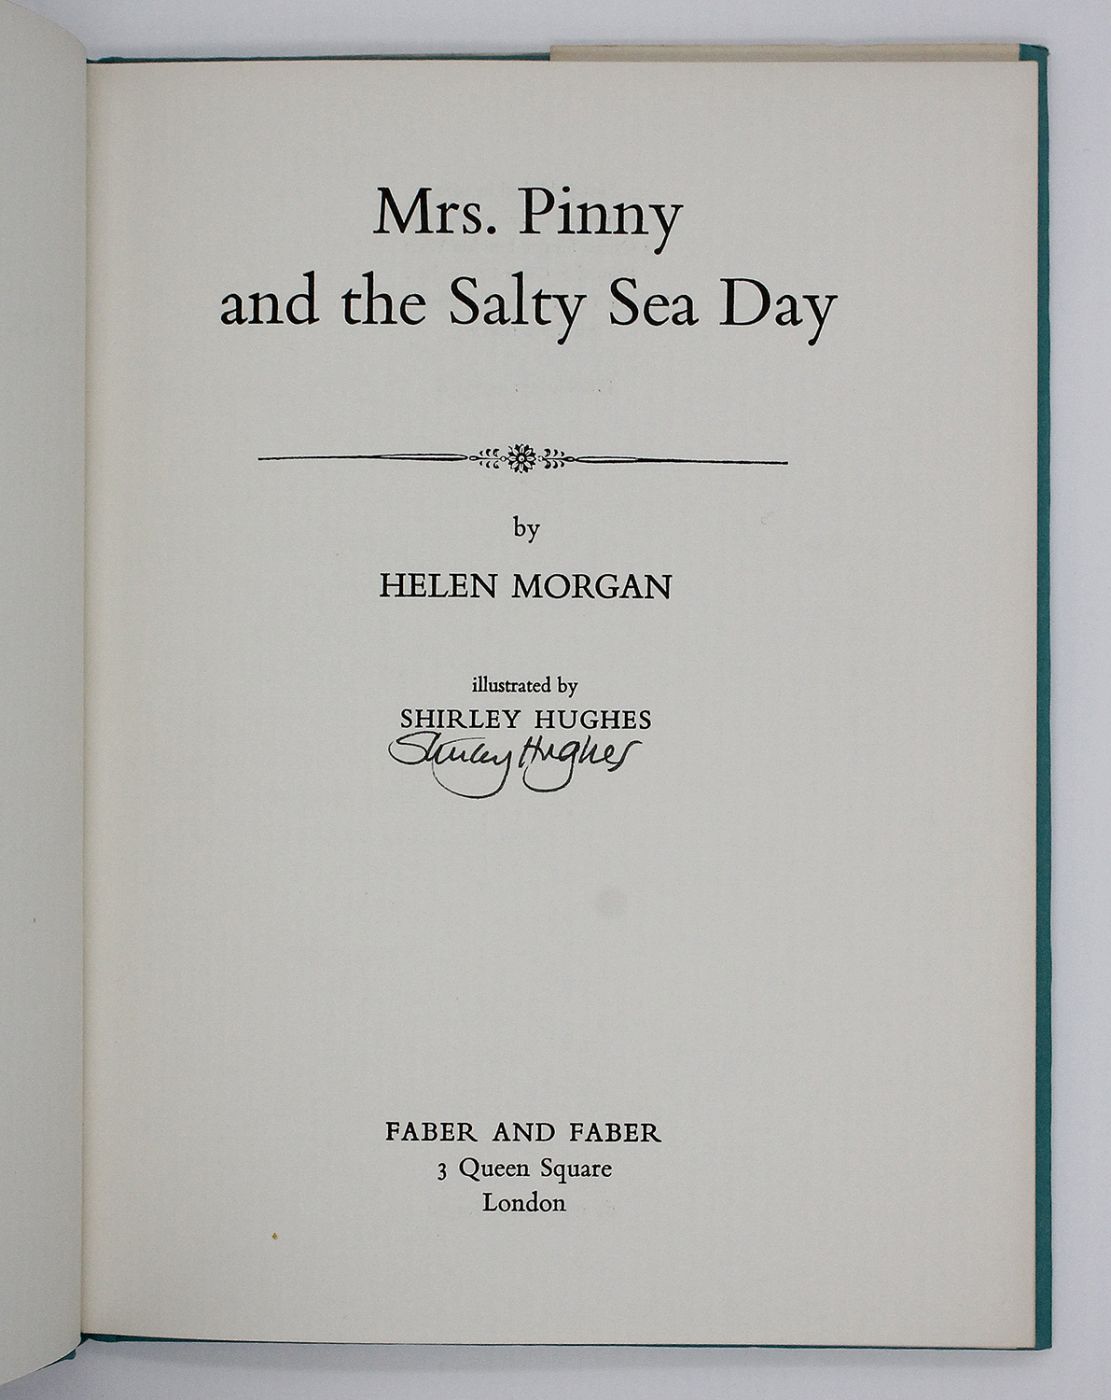 MRS PINNY AND THE SALTY SEA DAY -  image 2